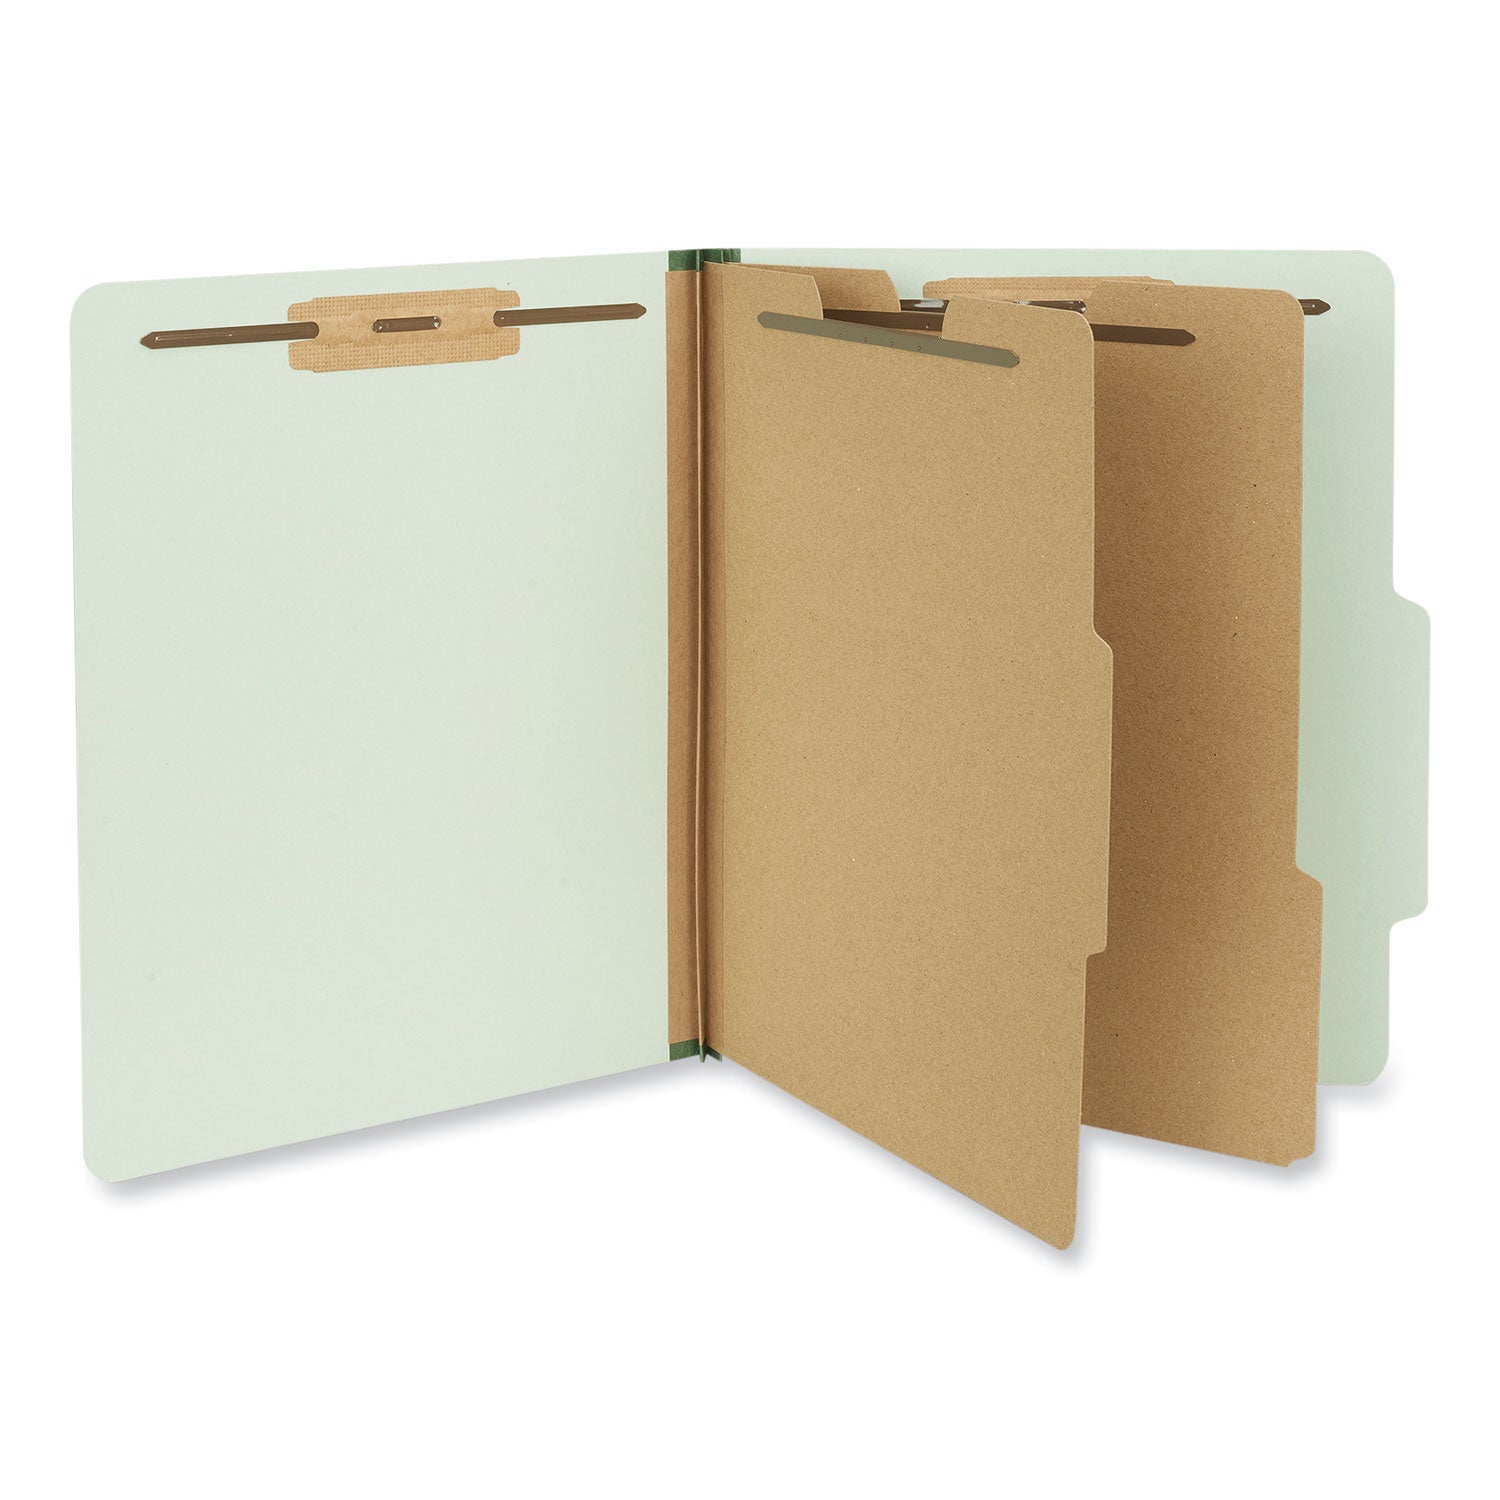 Six-Section Pressboard Classification Folders, 2" Expansion, 2 Dividers, 6 Fasteners, Letter Size, Gray-Green, 10/Box - 